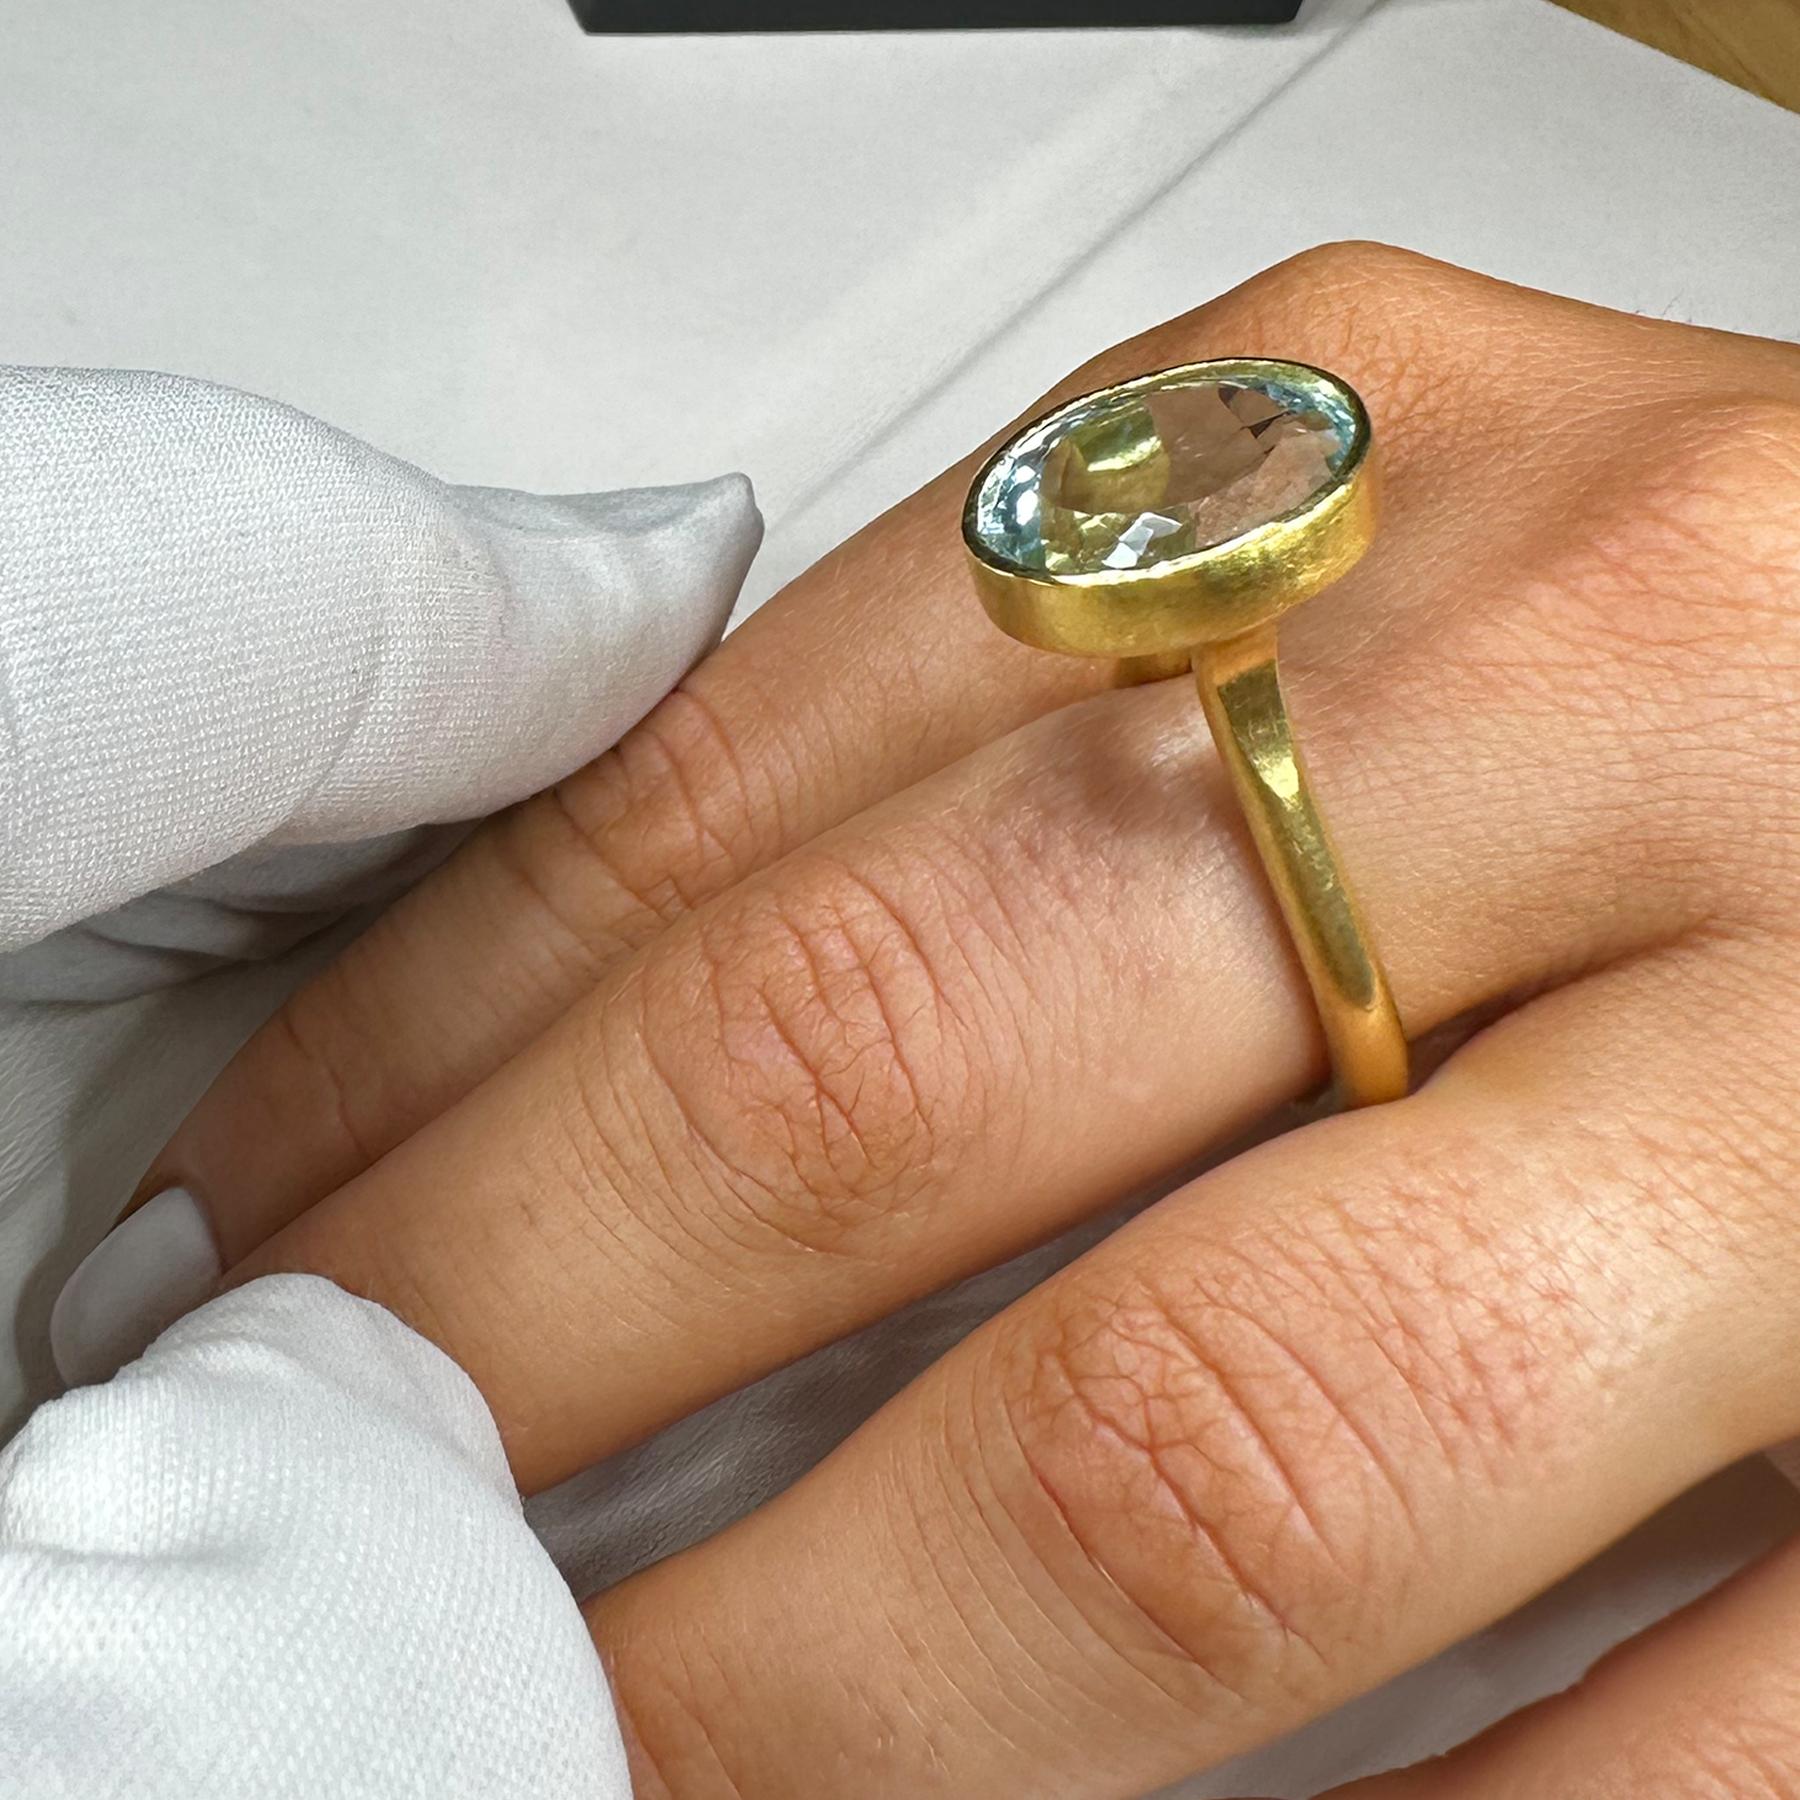 PHILIPPE SPENCER 12.6 Ct. Aquamarine in 22K and 20K Gold Statement Ring For Sale 4